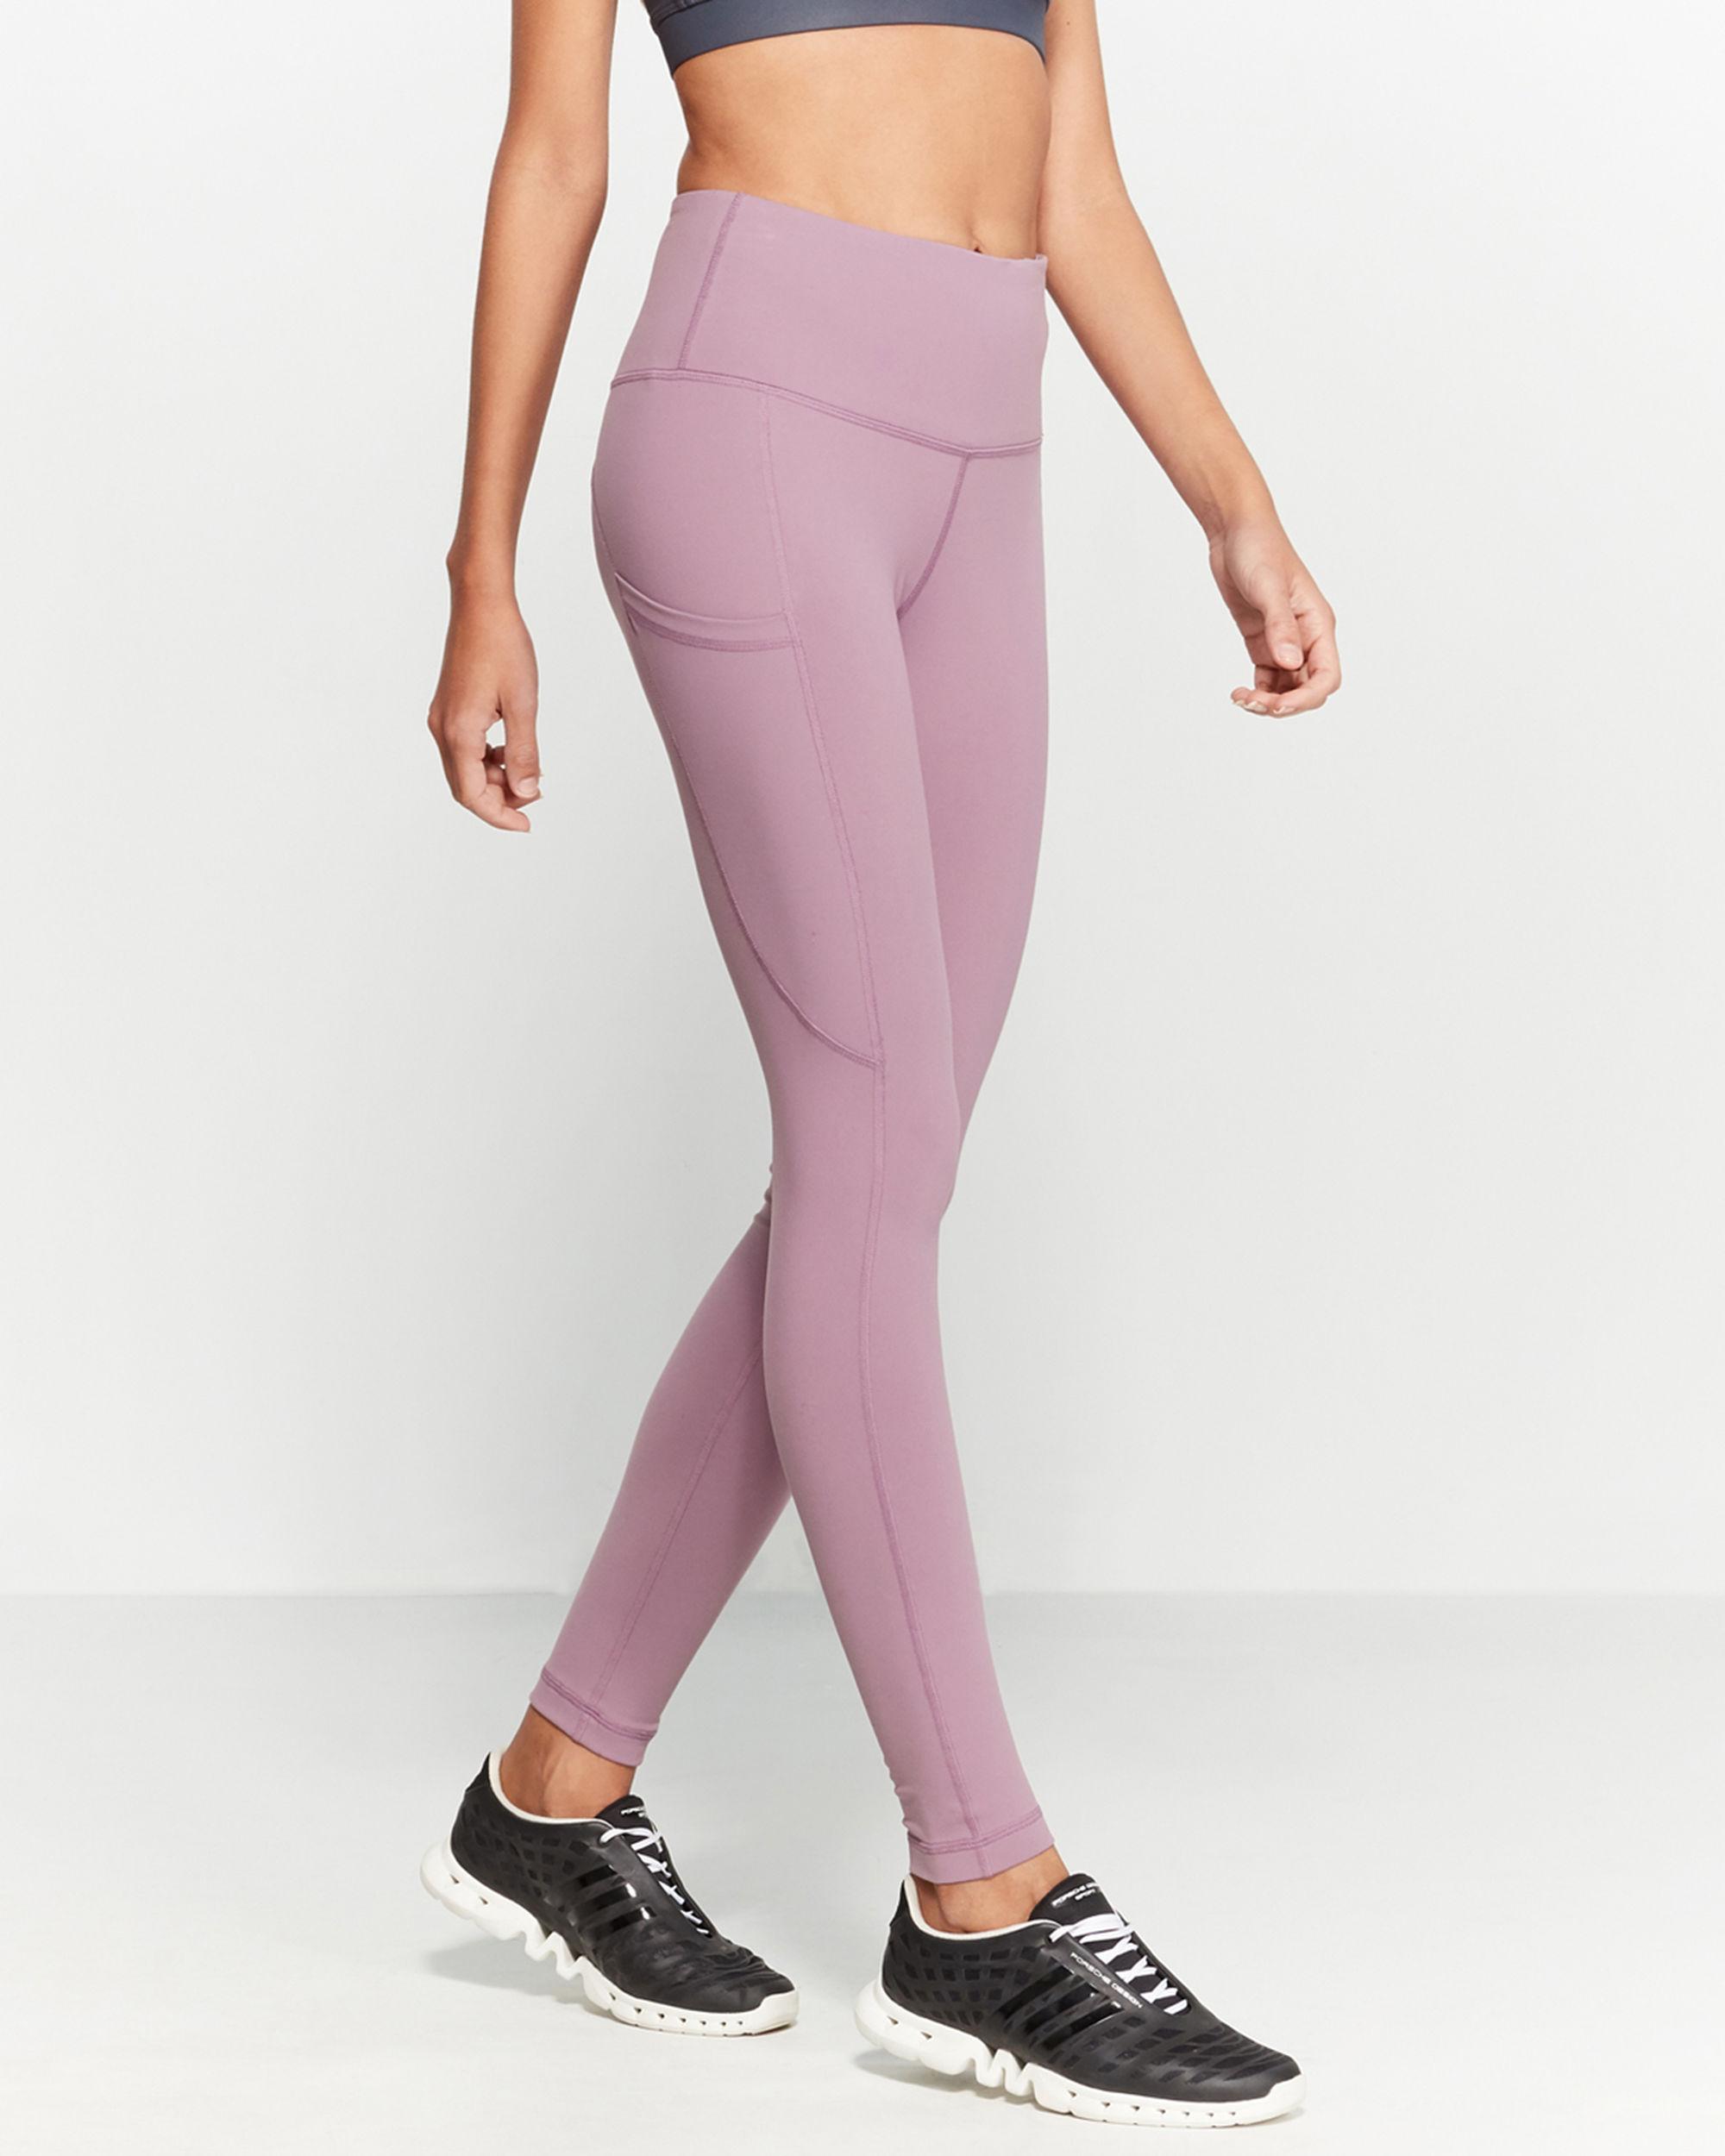 Lyst - 90 Degree By Reflex Missy High-rise Athletic Leggings in Pink